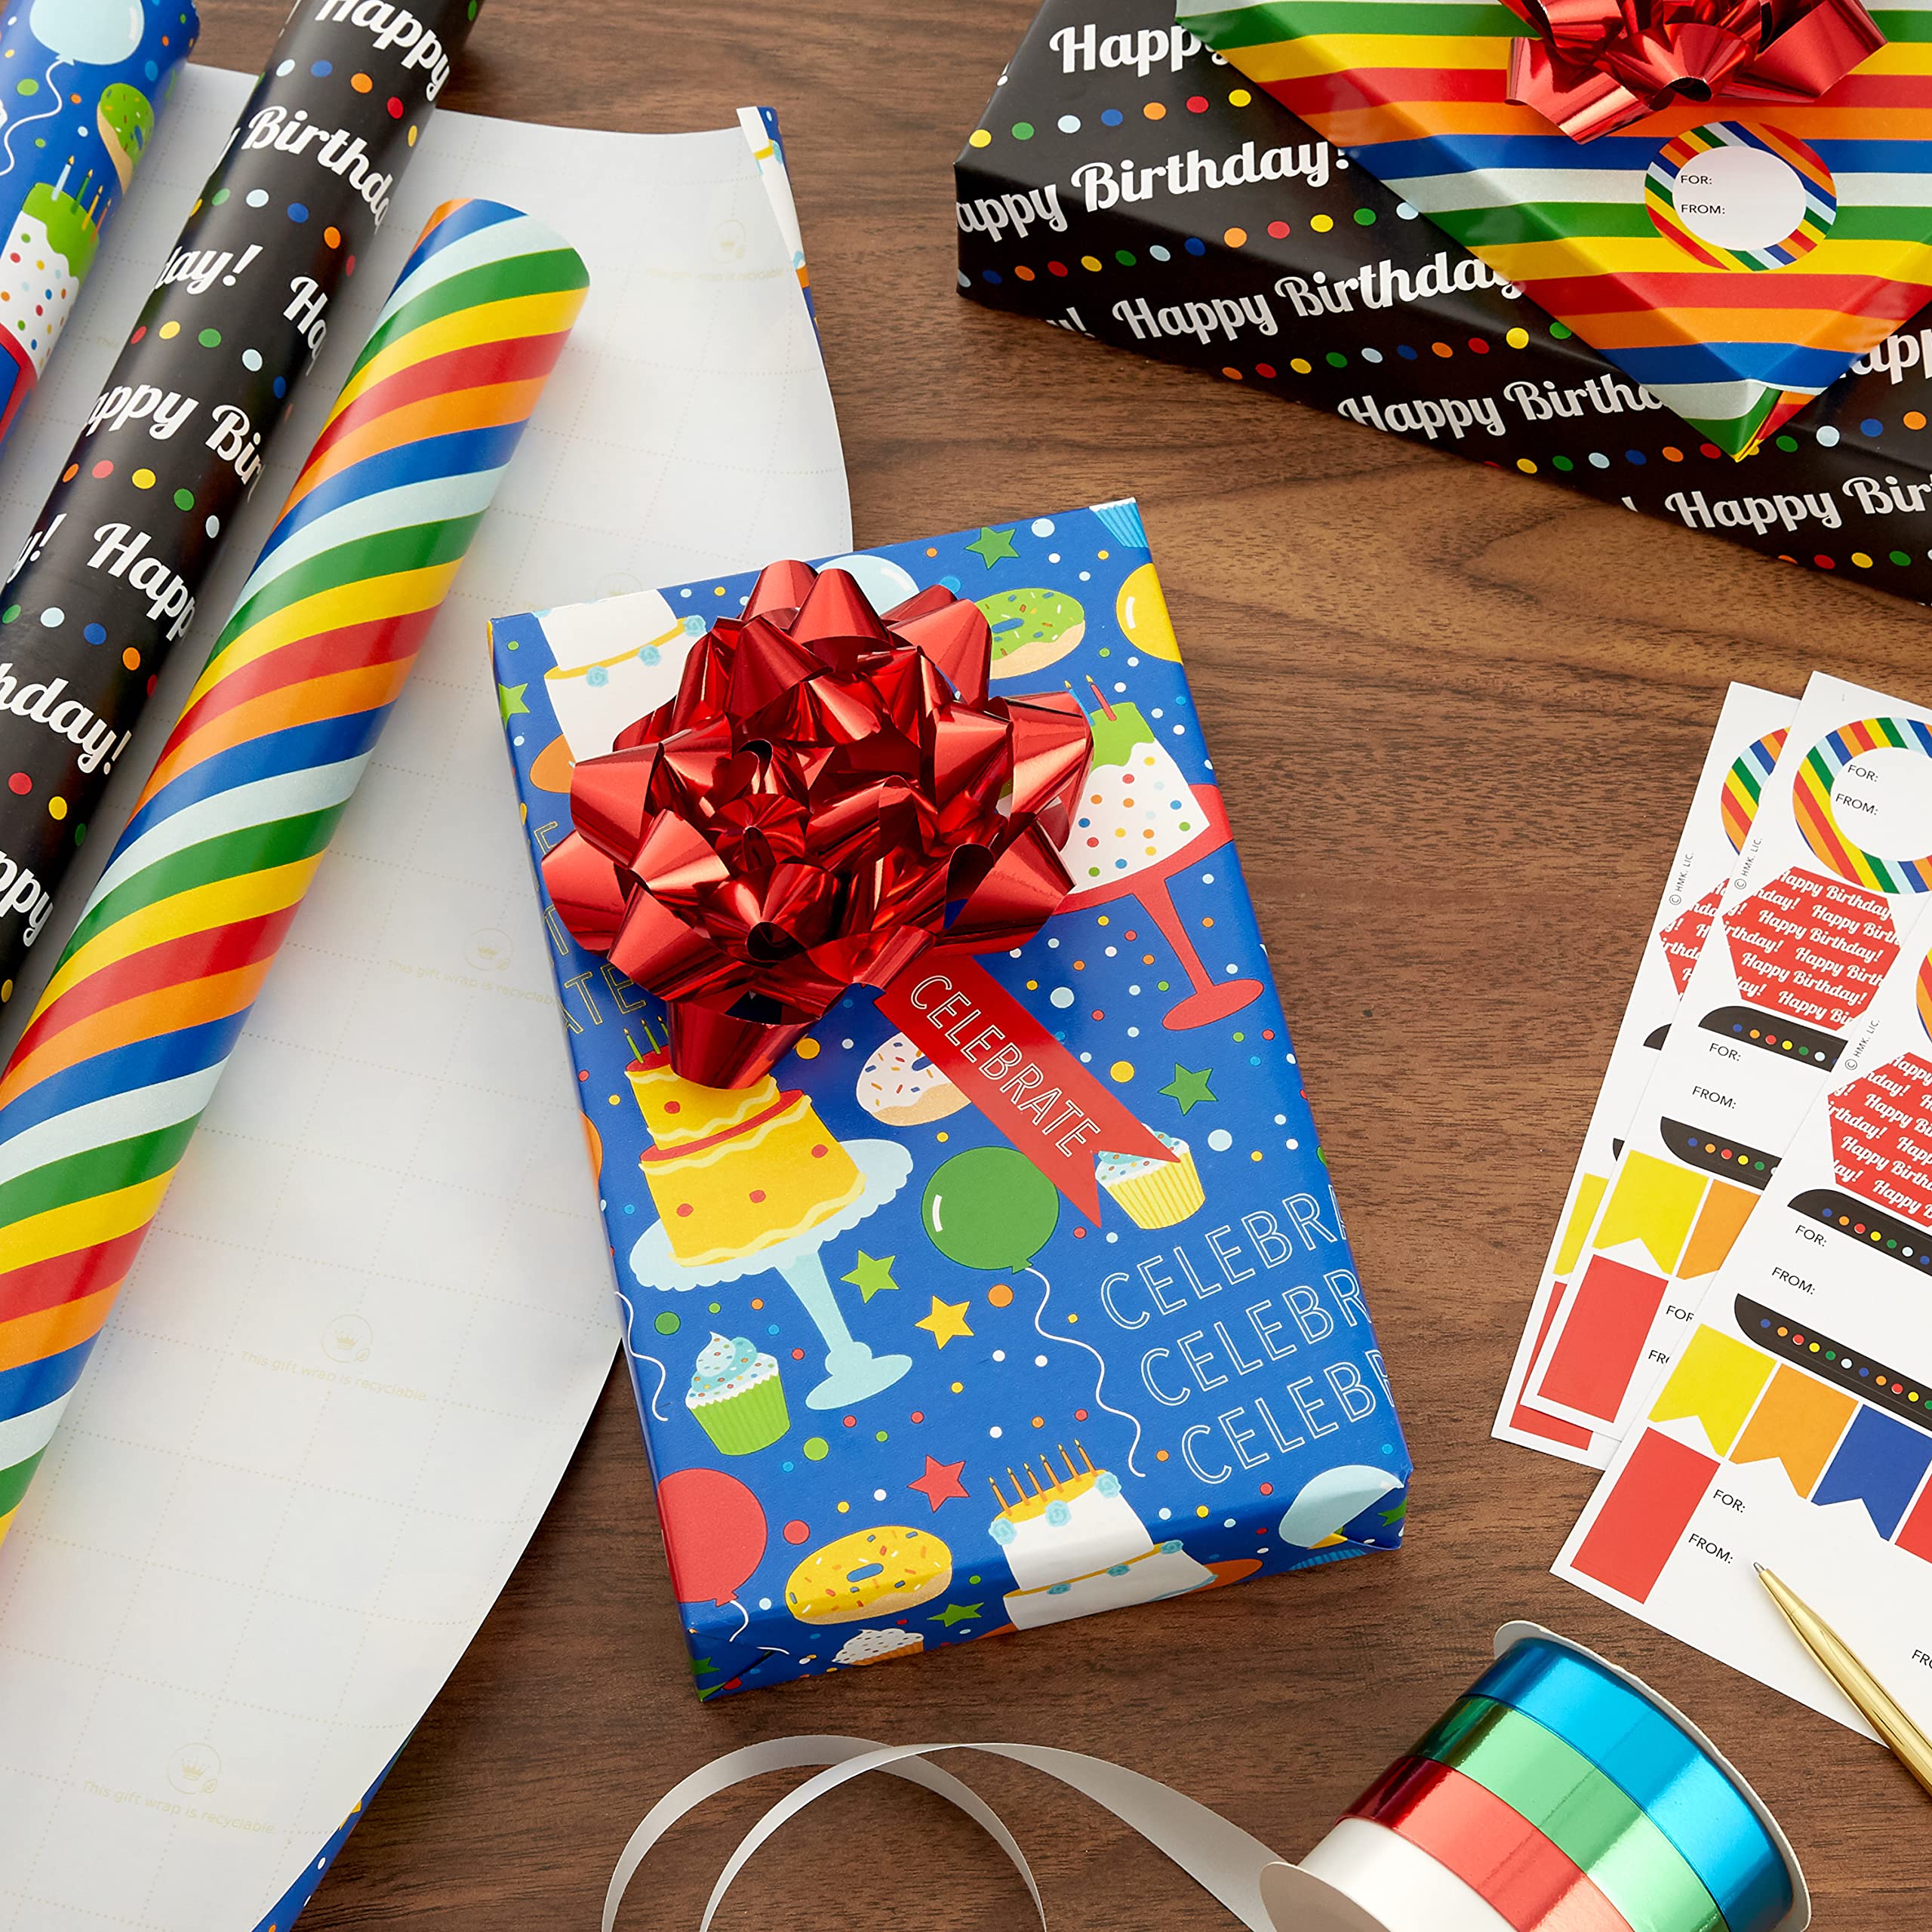 Hallmark Birthday Wrapping Paper Set (3 Rolls: 90 Sq. Ft. Ttl, 10 Bows, Ribbon, Gift Tag Stickers) Rainbow Stripes, Cake, Happy Birthday for Kids and Adults